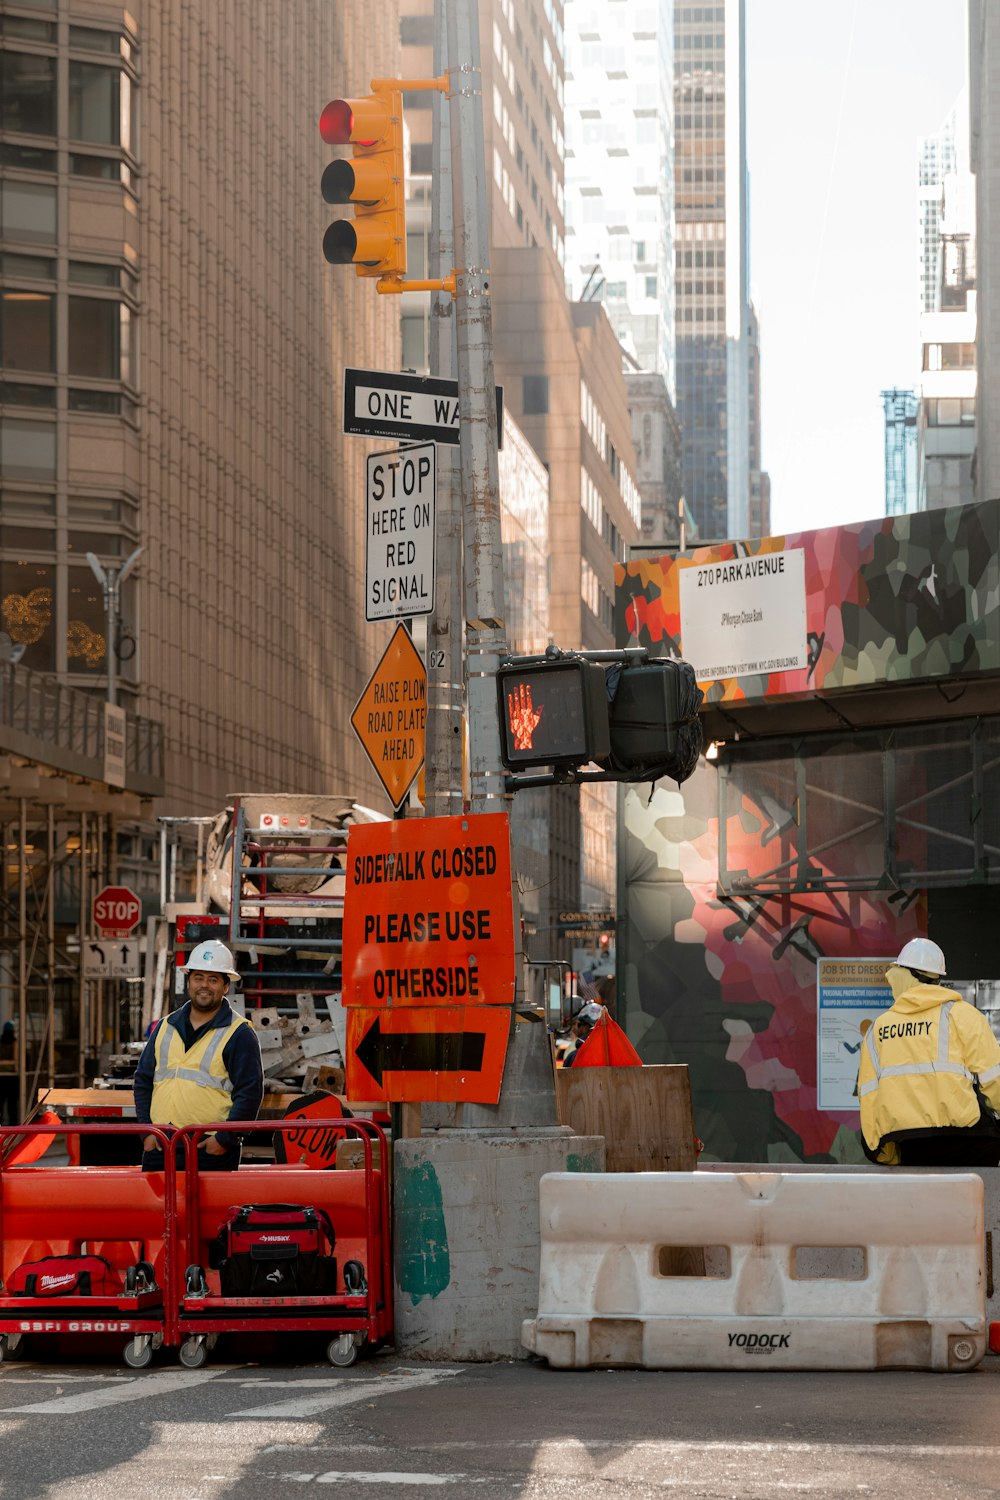 a street scene with a construction worker on the side of the road